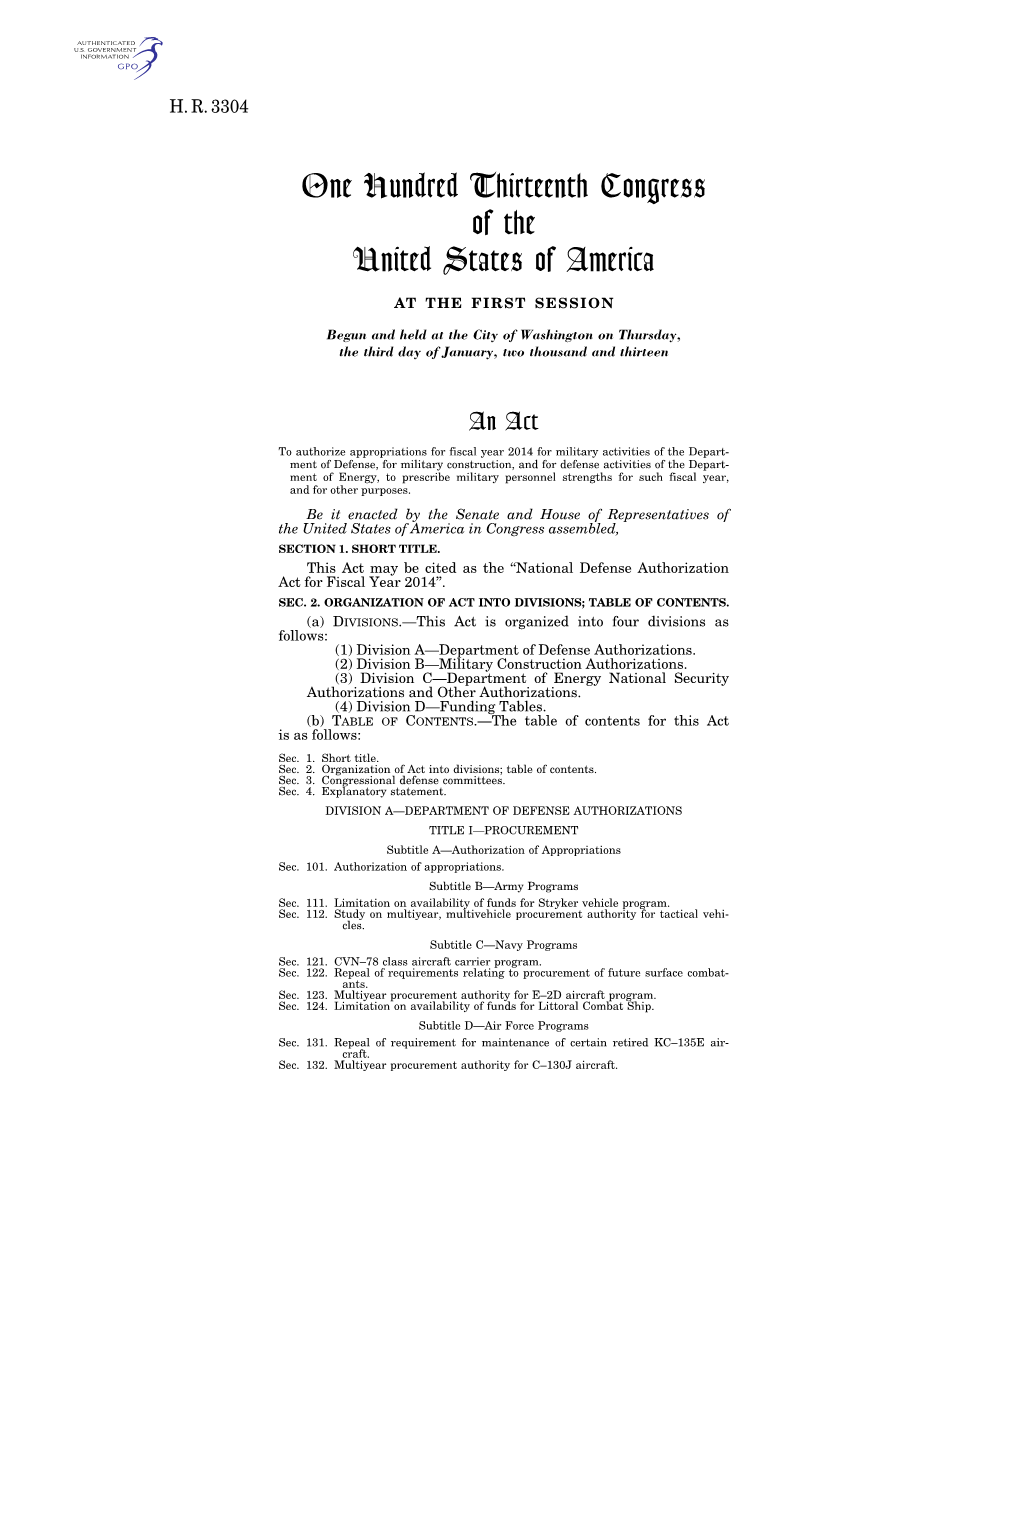 Enrolled Text of H.R. 3304 from The